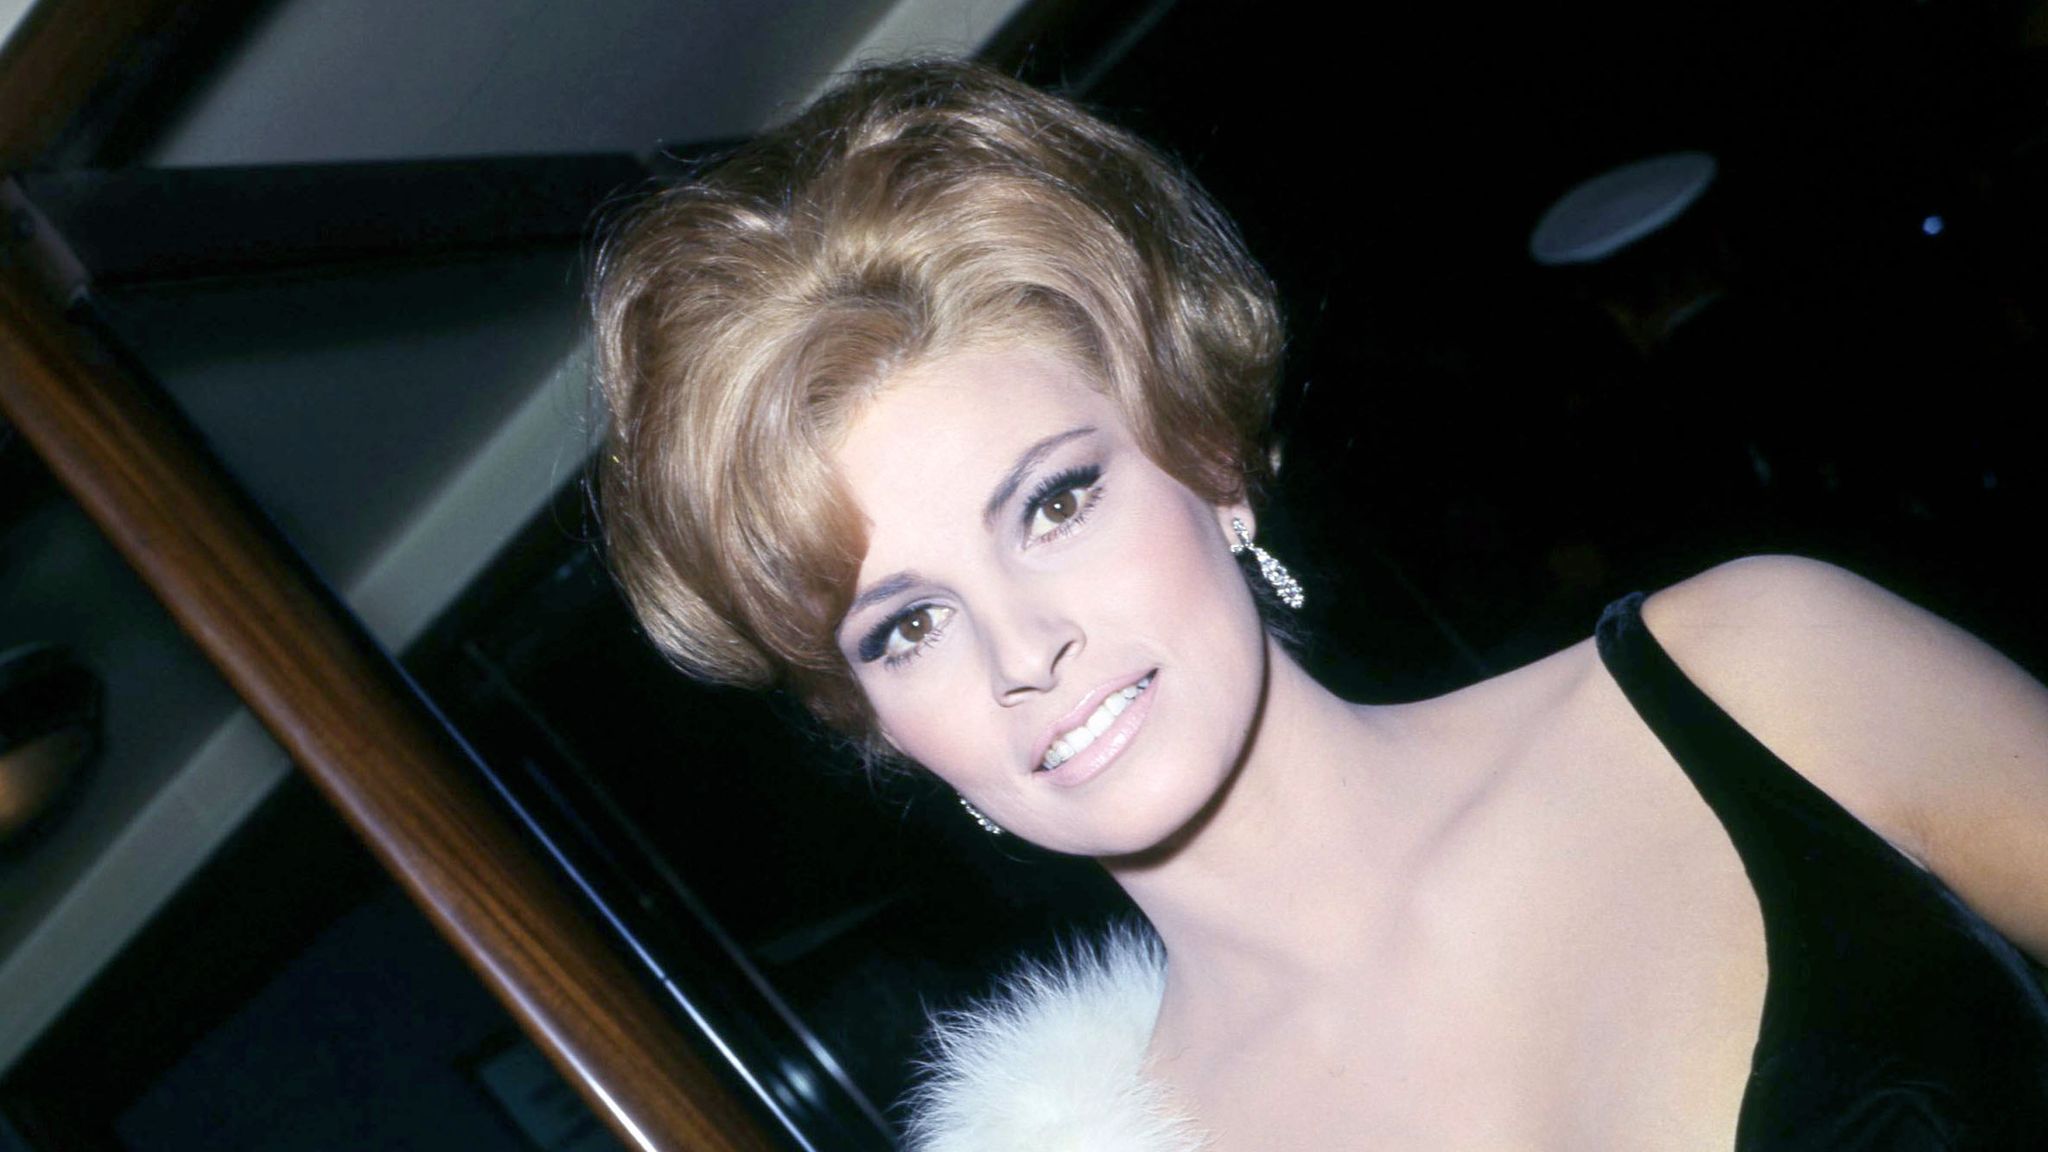 Raquel Welch Hollywood Actress Dies At 82 After Brief Illness Ents And Arts News Sky News